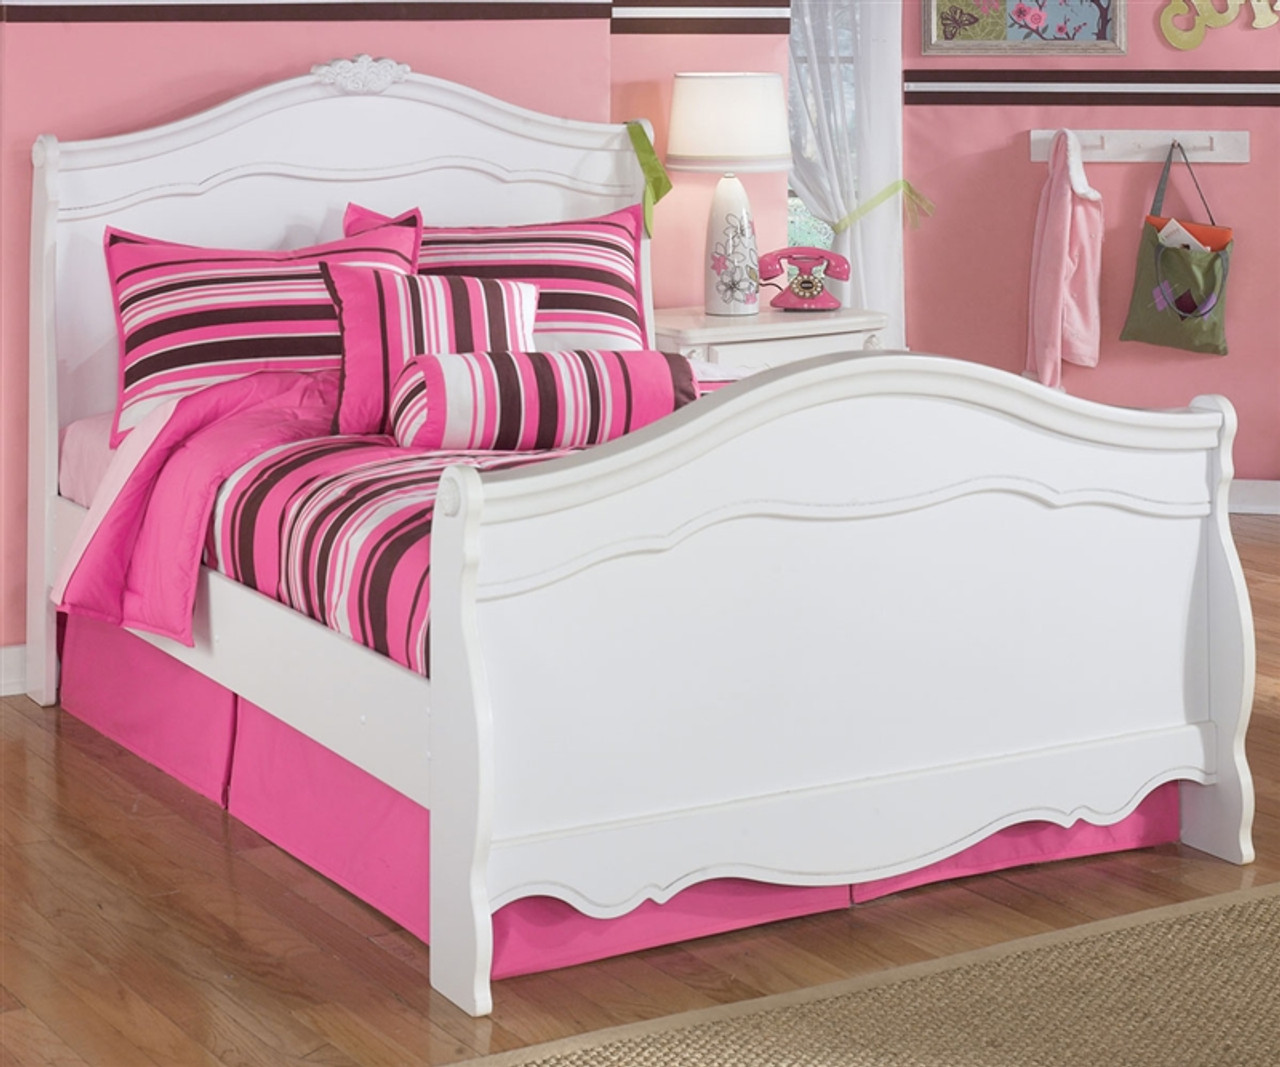 Ashley Furniture Exquisite Full Size Sleigh Bed Kids Exquisite Full Size Sleigh Bed In White Finish Ashley Kids Furniture Exquisite Collection B188